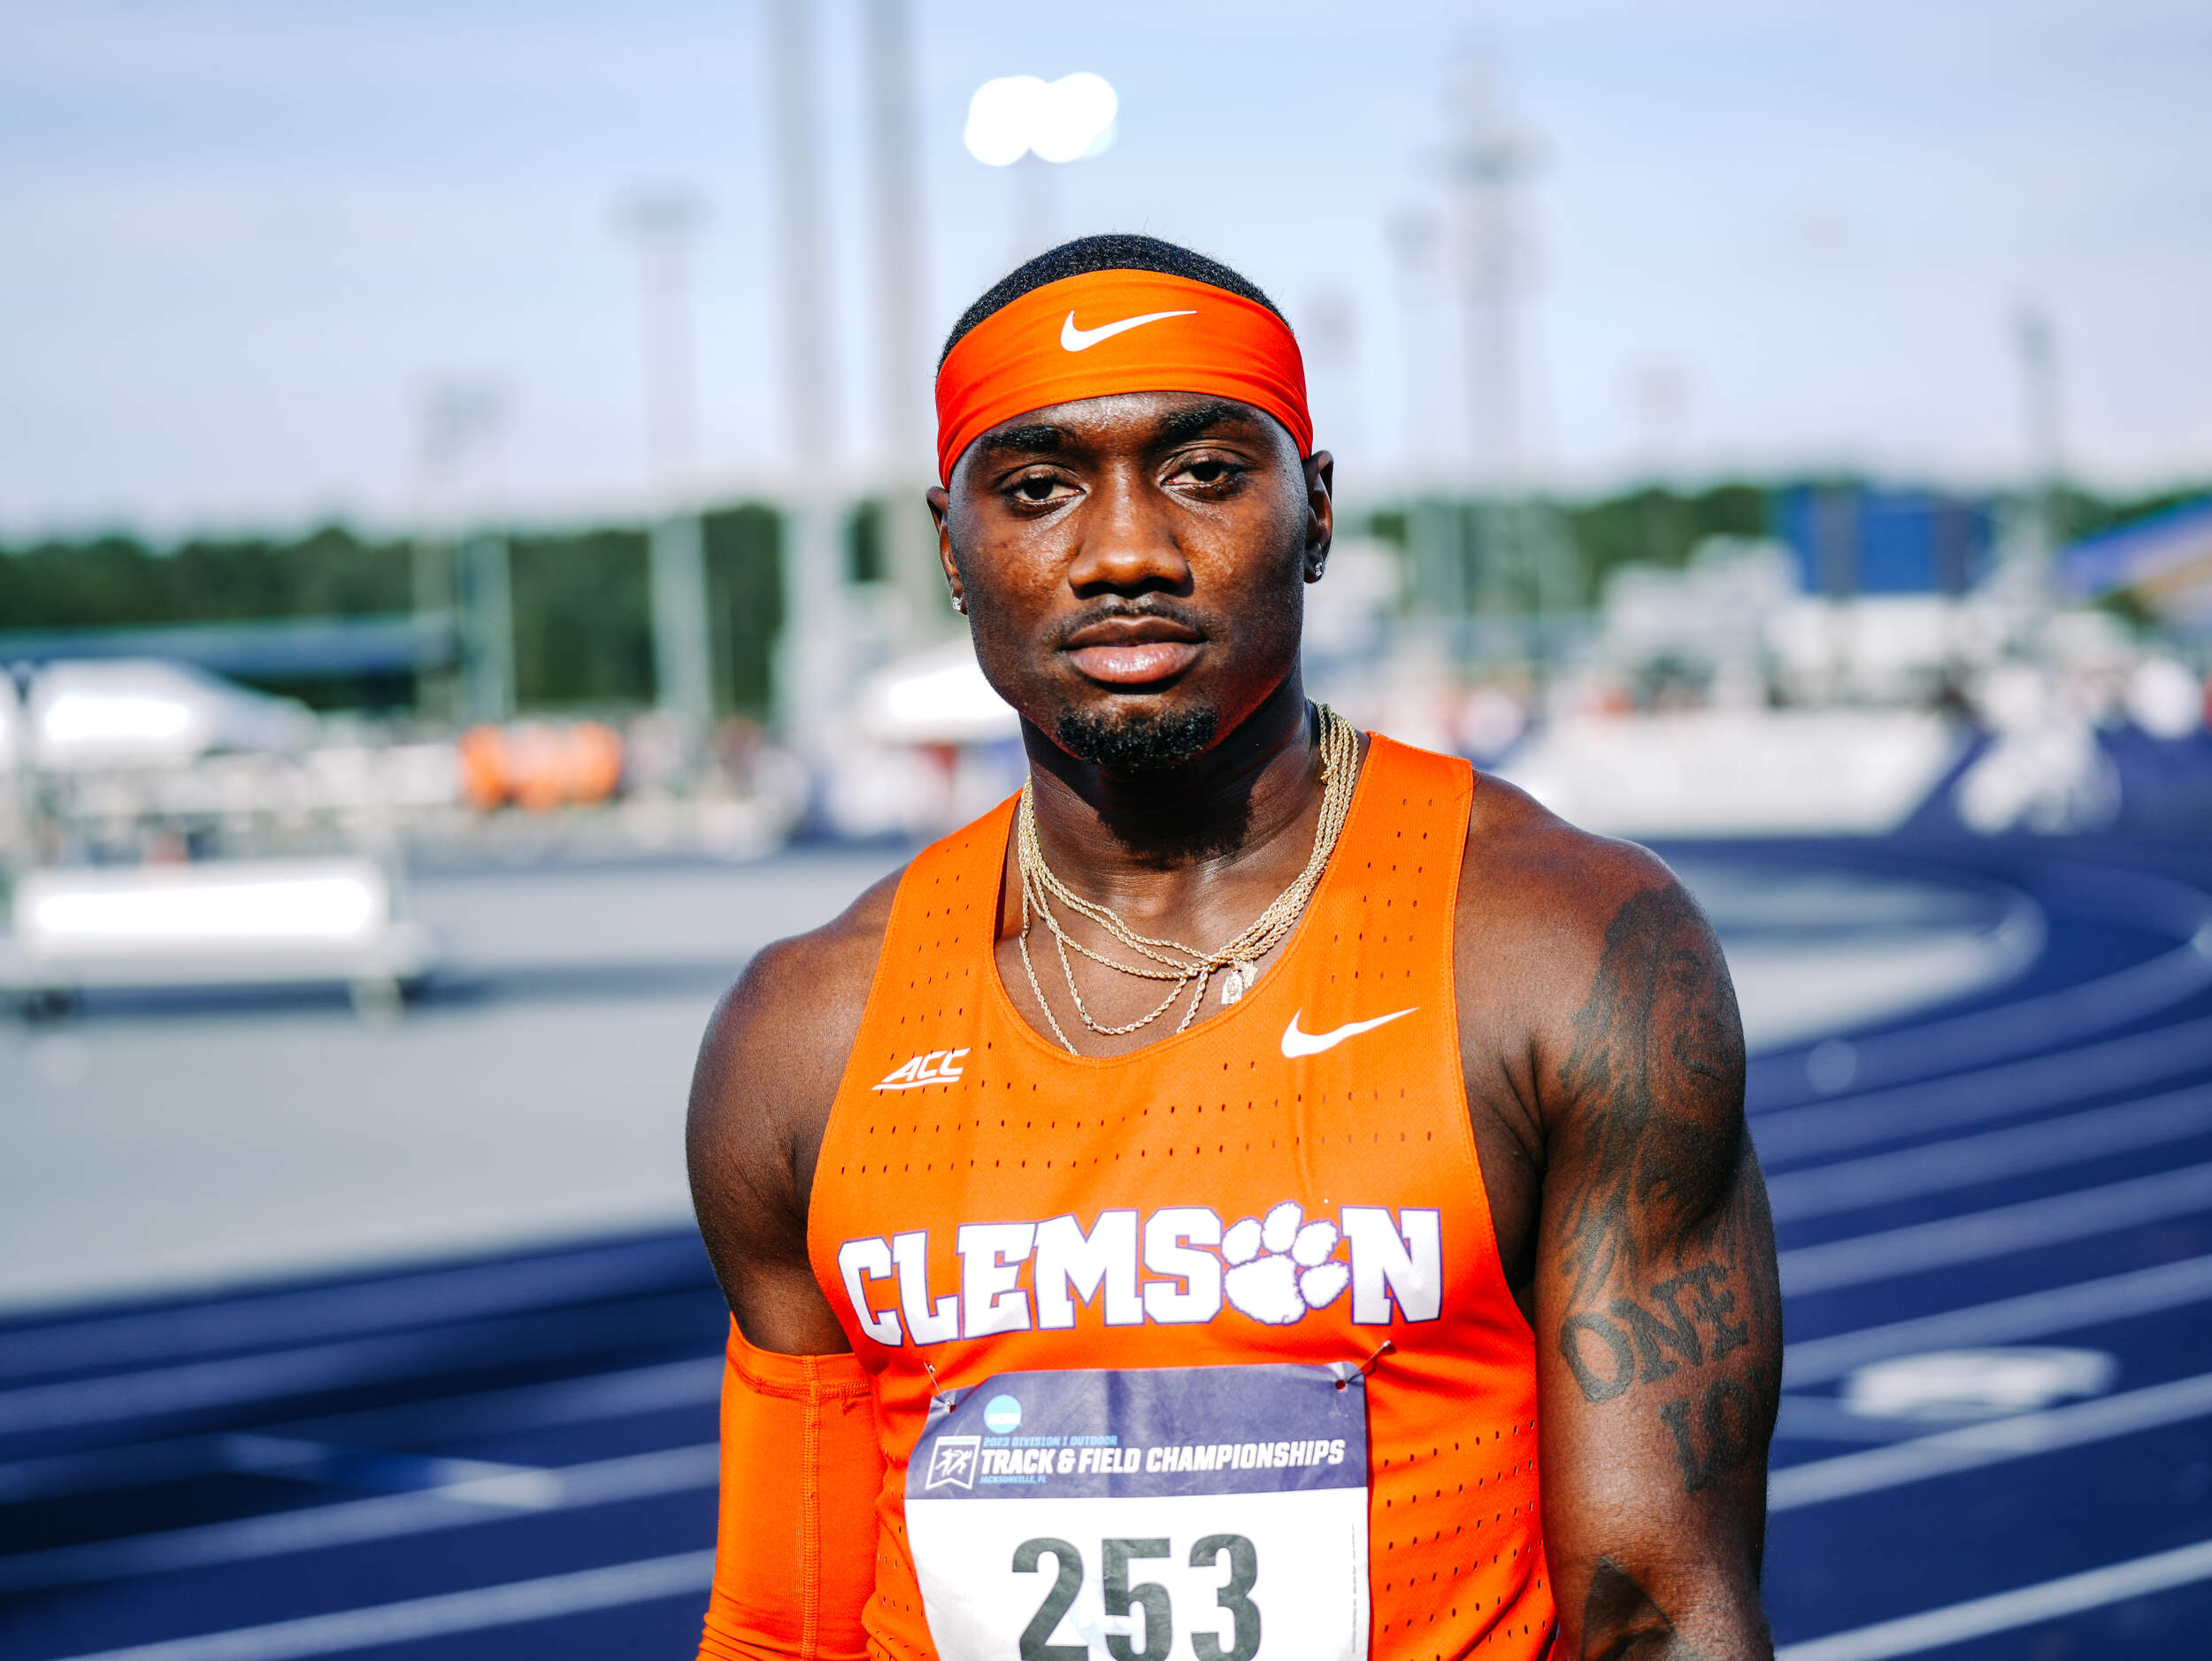 Clemson Has Eight Total Entries Qualify for Nationals – Clemson